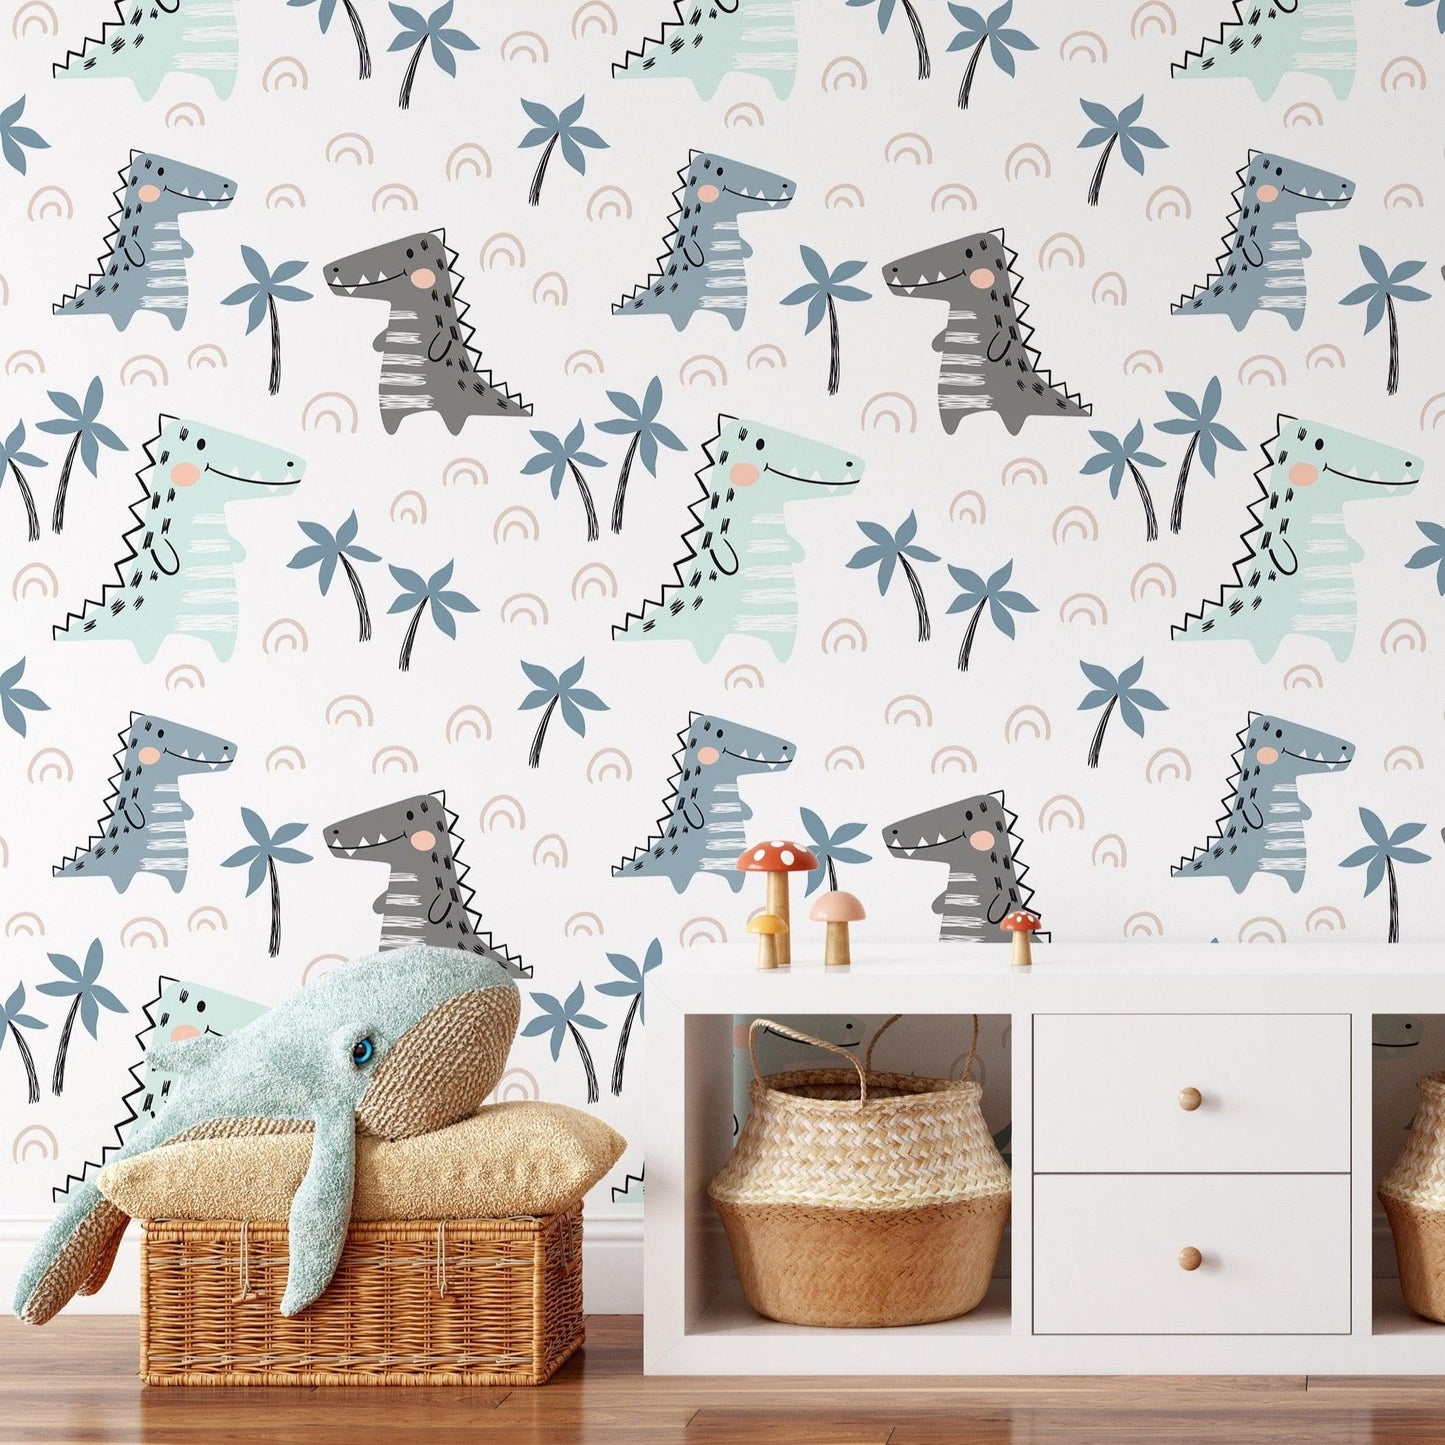 Сhinese Style Tree Branch Hummingbird Wallpaper Сhinese Style Tree Branch Hummingbird Wallpaper Cute Green Dinosaurs Doodle Removable Kids Wallpaper 